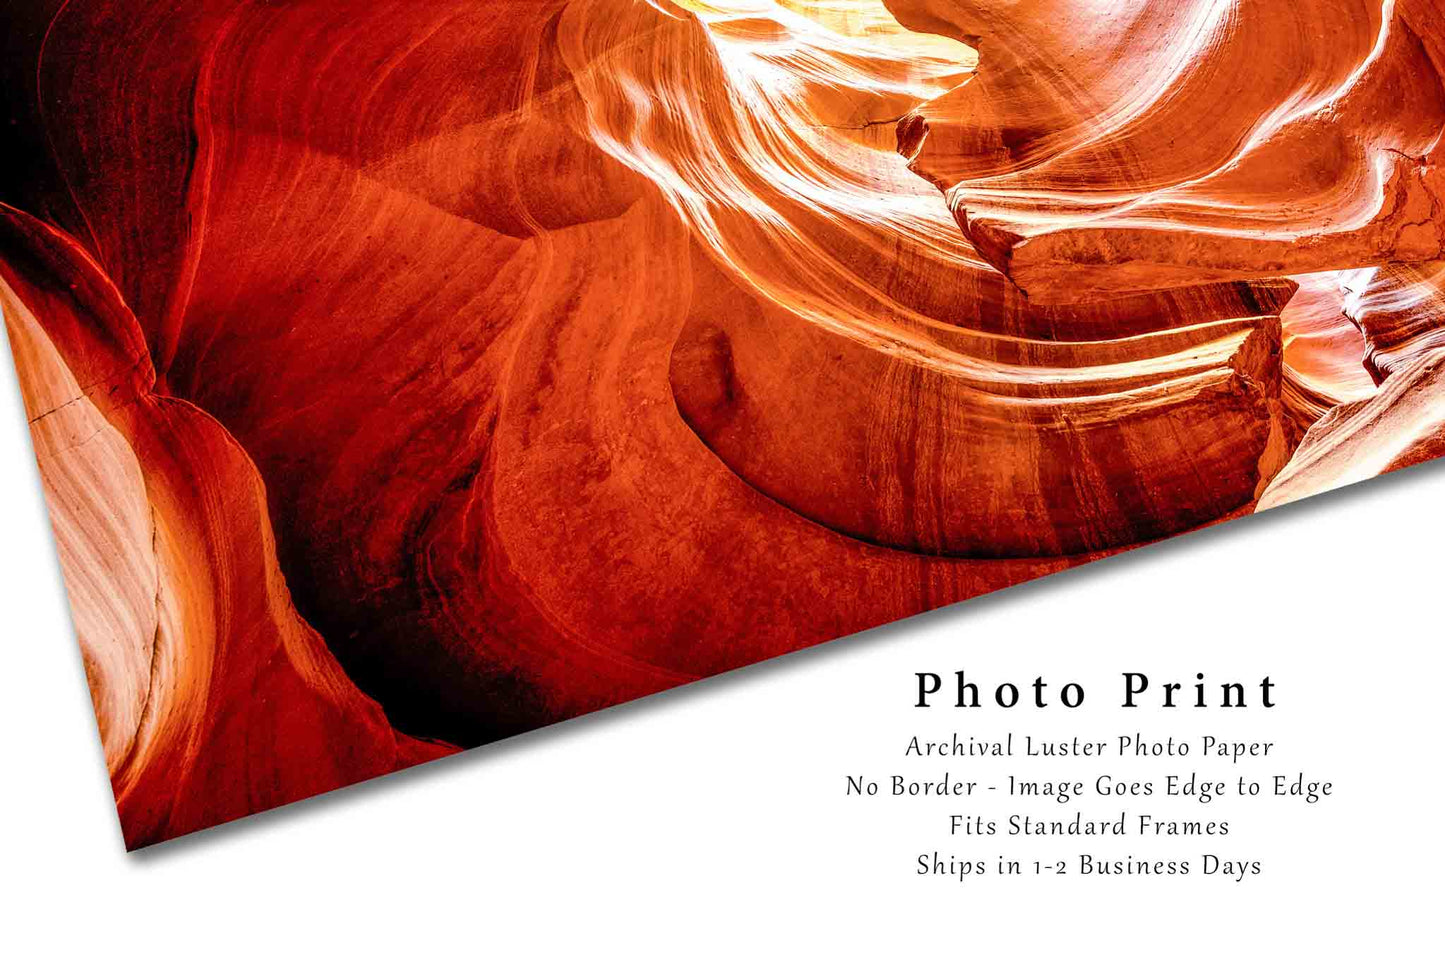 Southwest Photography Print - Wall Art Picture of Light Through Tunnel in Antelope Canyon in Arizona Abstract Slot Canyon Decor